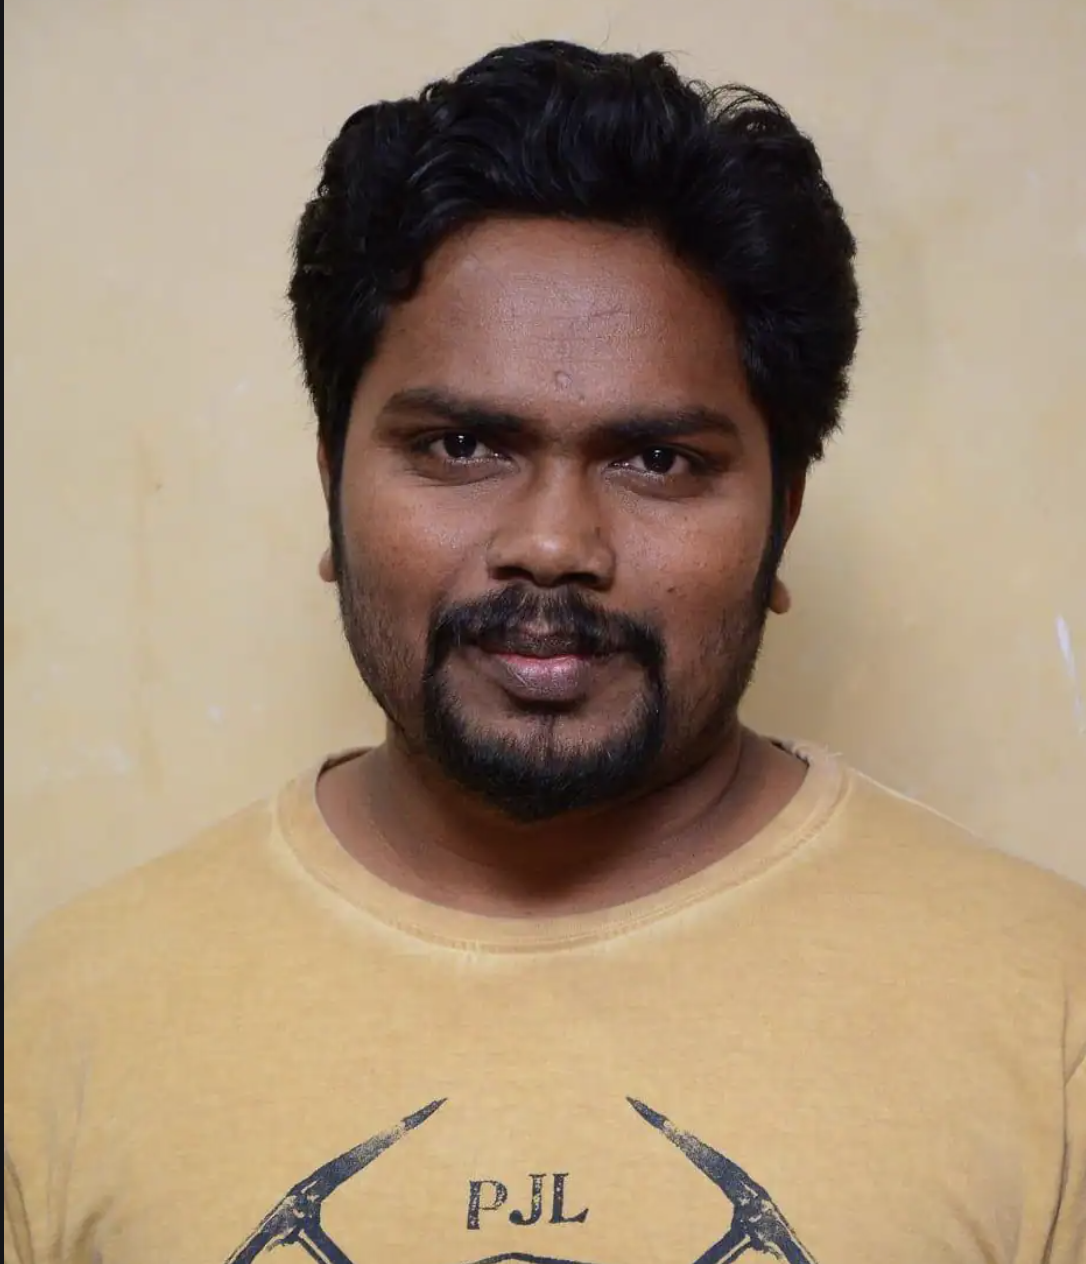 No one can own margazhi month says Director Pa Ranjith 